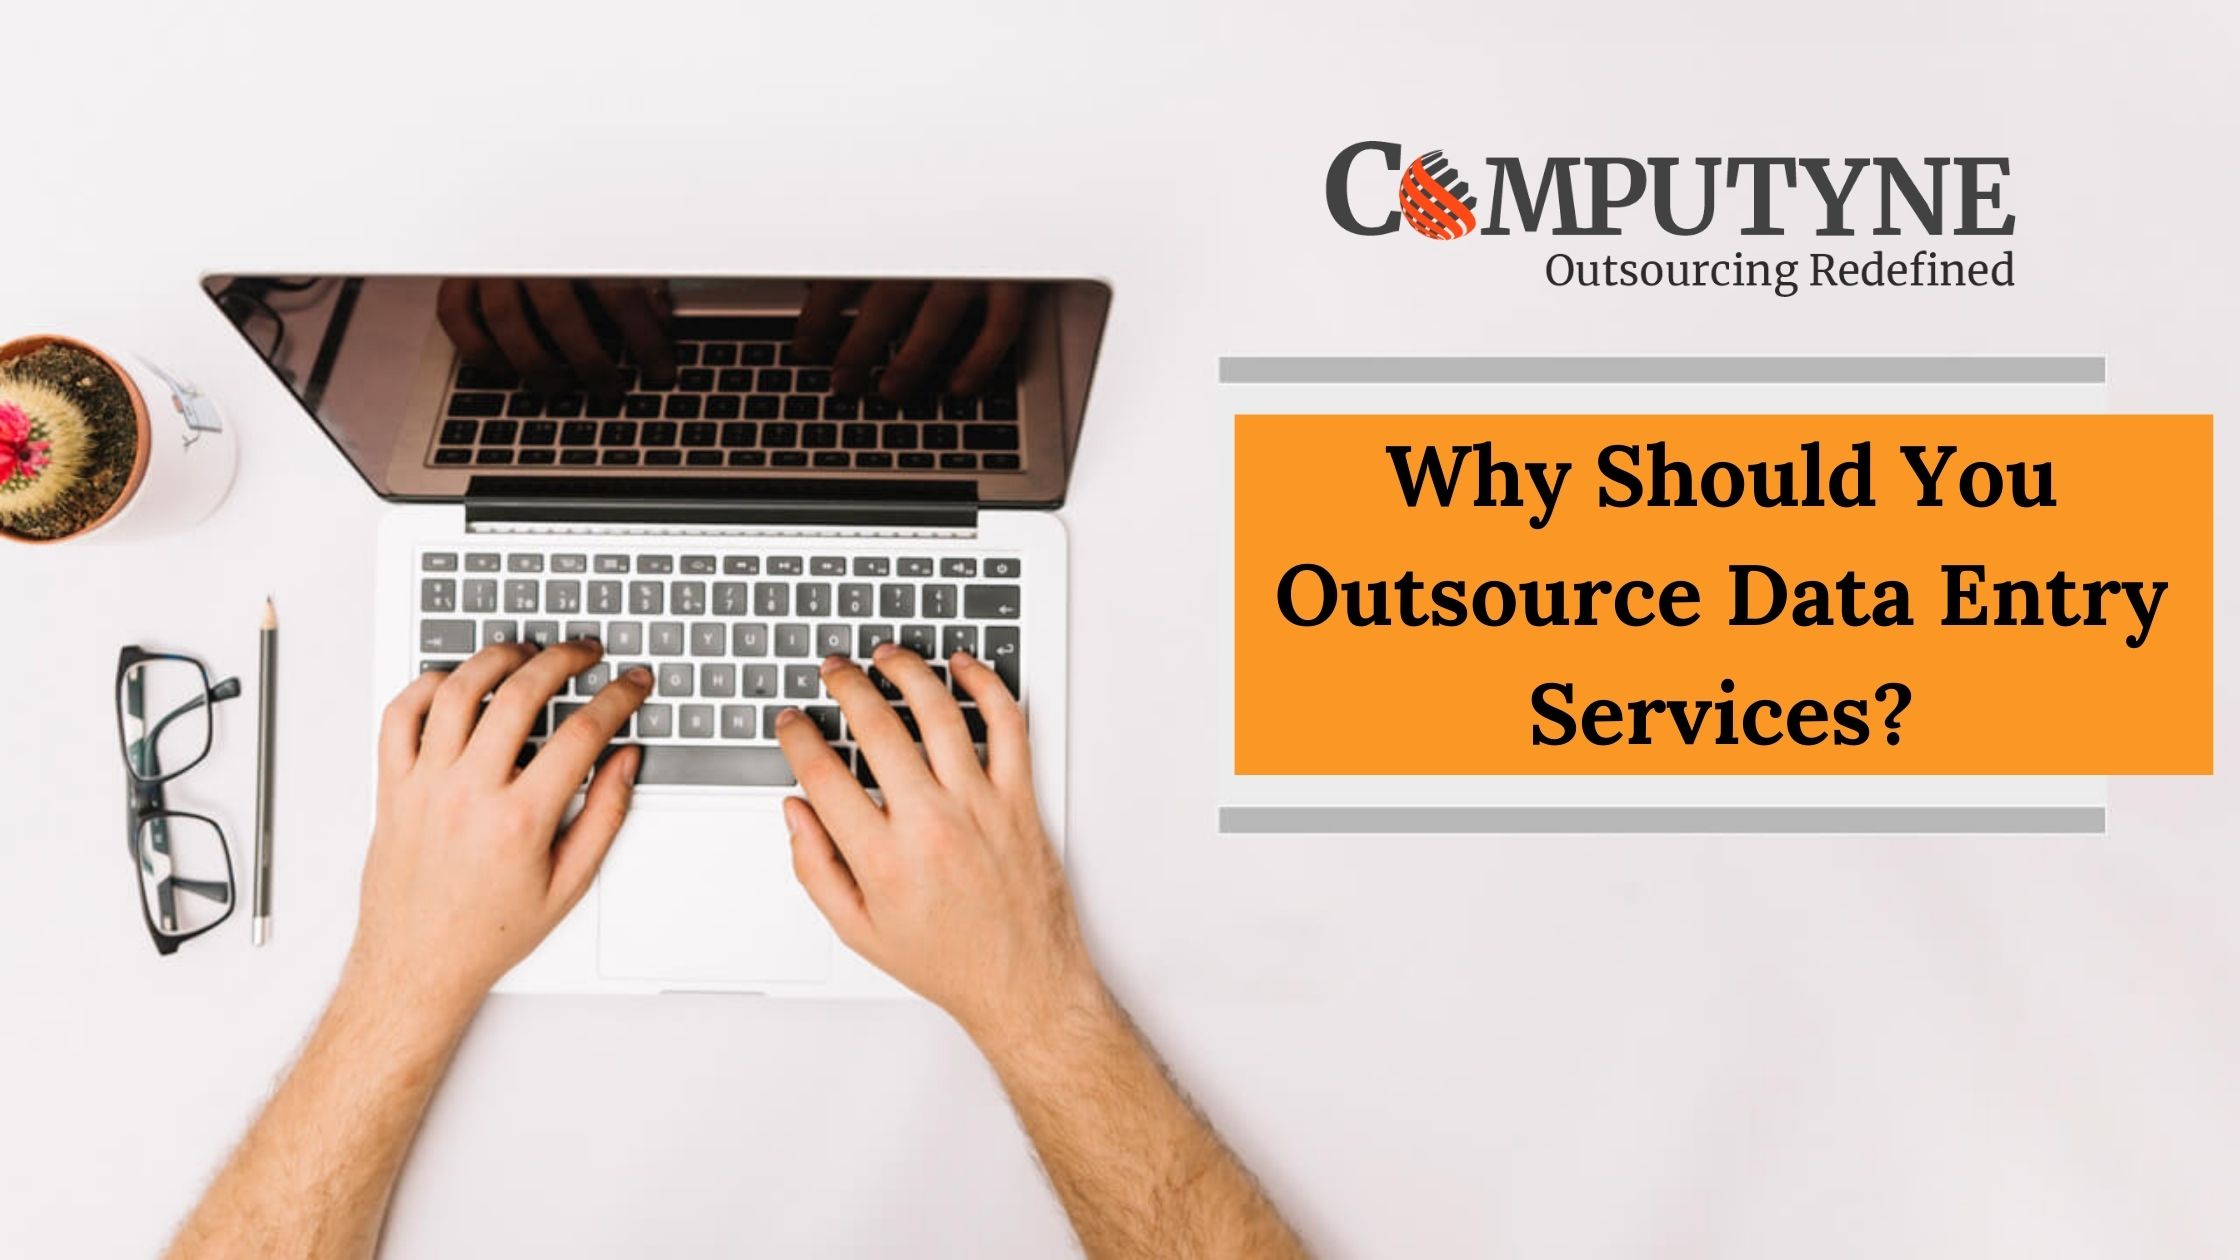 Why Should You Outsource Data Entry Services